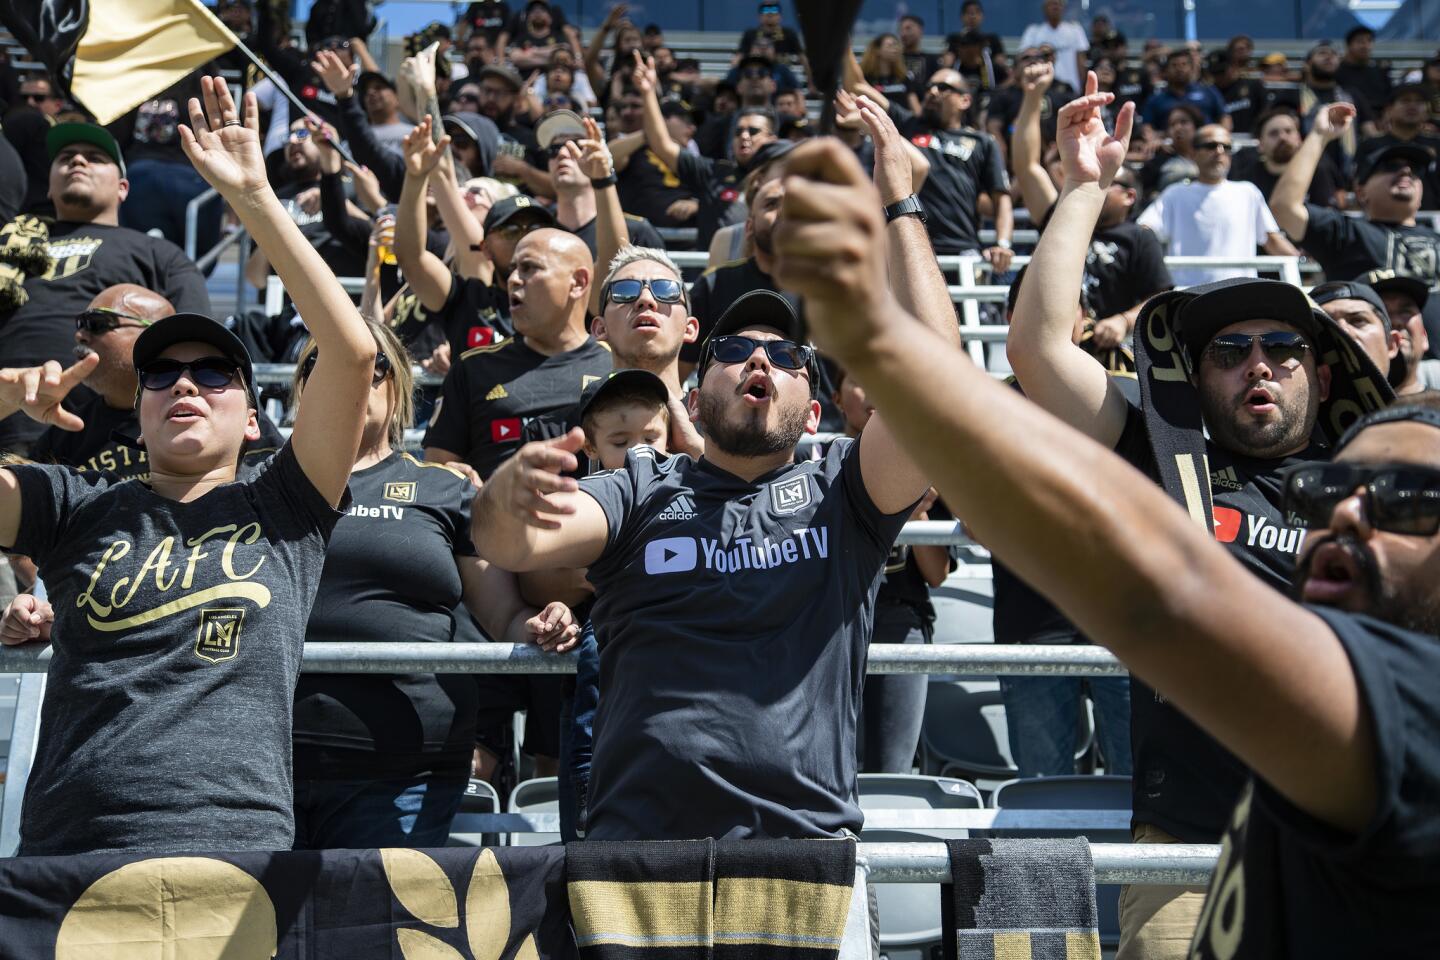 Fans go wild while watching LFAC score against Montreal during a screening of the game at Banc of California Stadium on April 21.